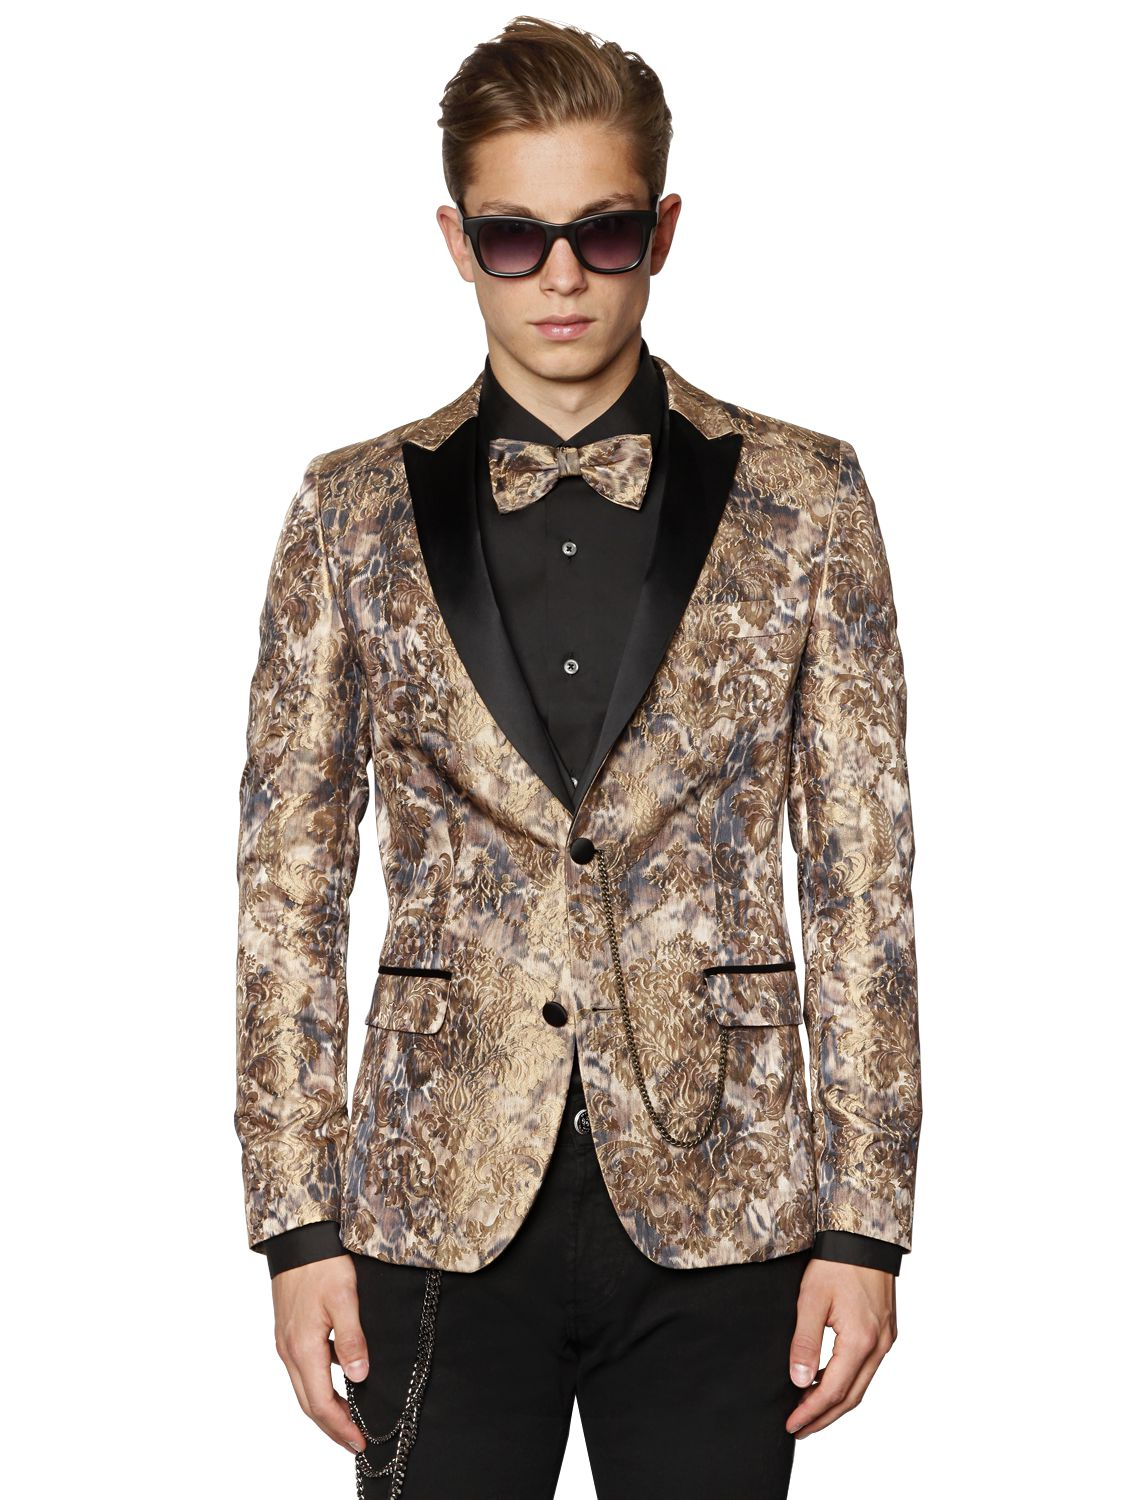 Lyst - Lords & Fools Embossed Techno Jacquard Jacket in Metallic for Men